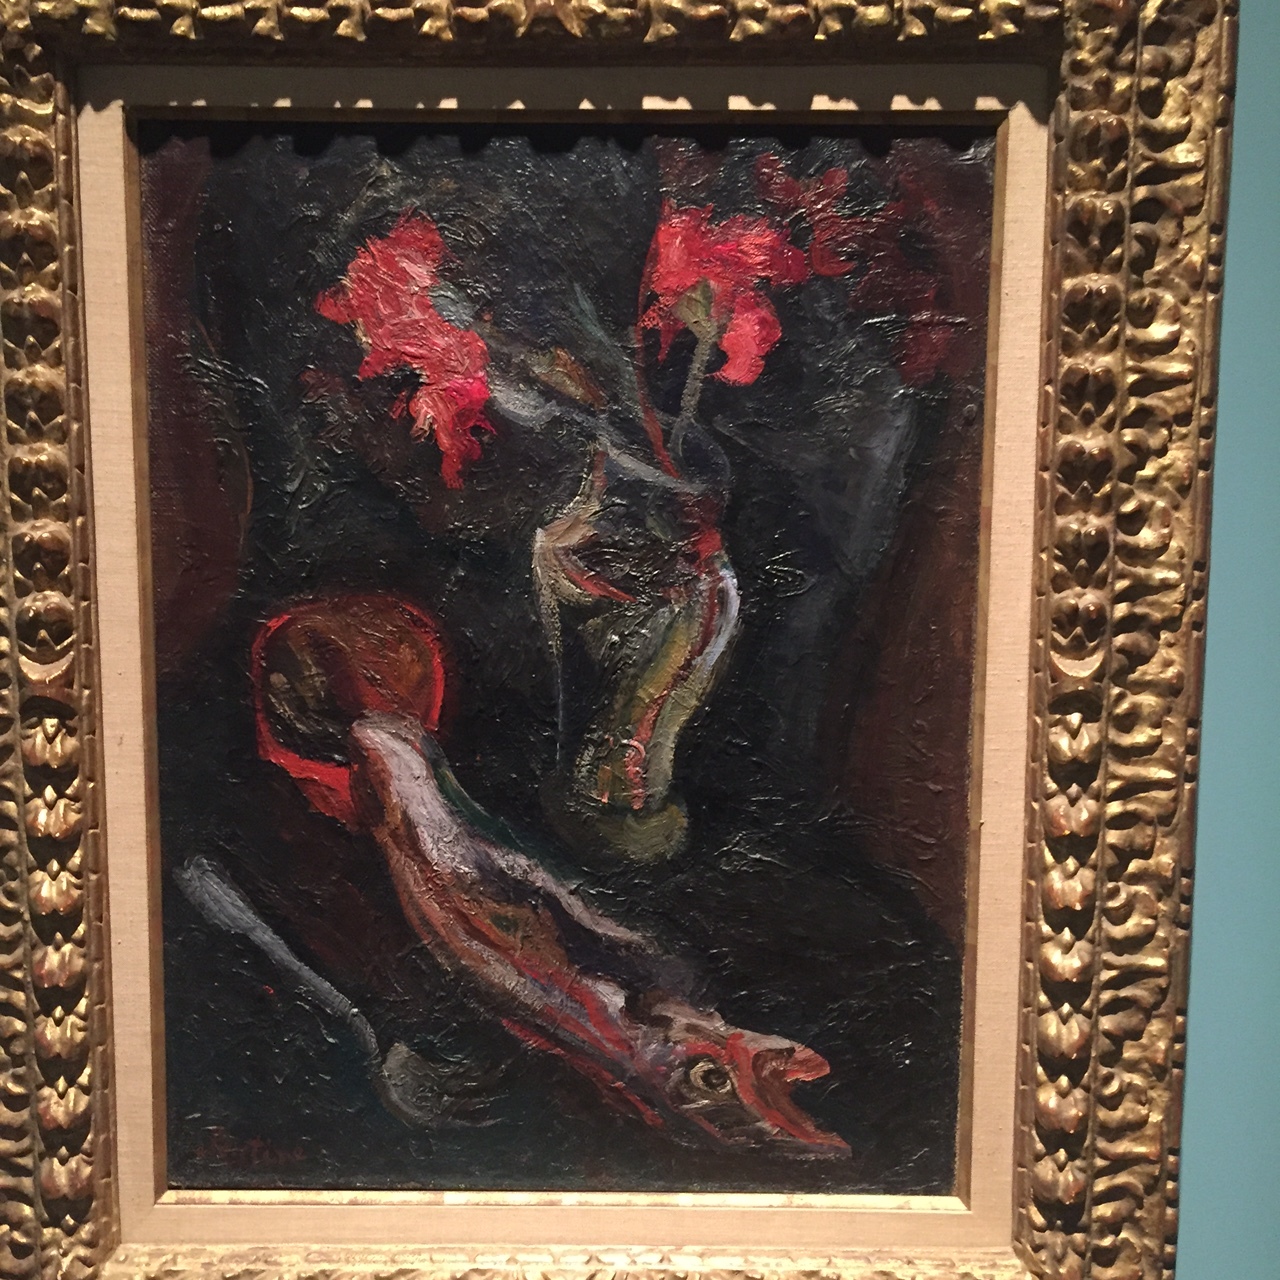 Dorothea Tanning opens eyes and doors at the Tate Modern — CultureZohn